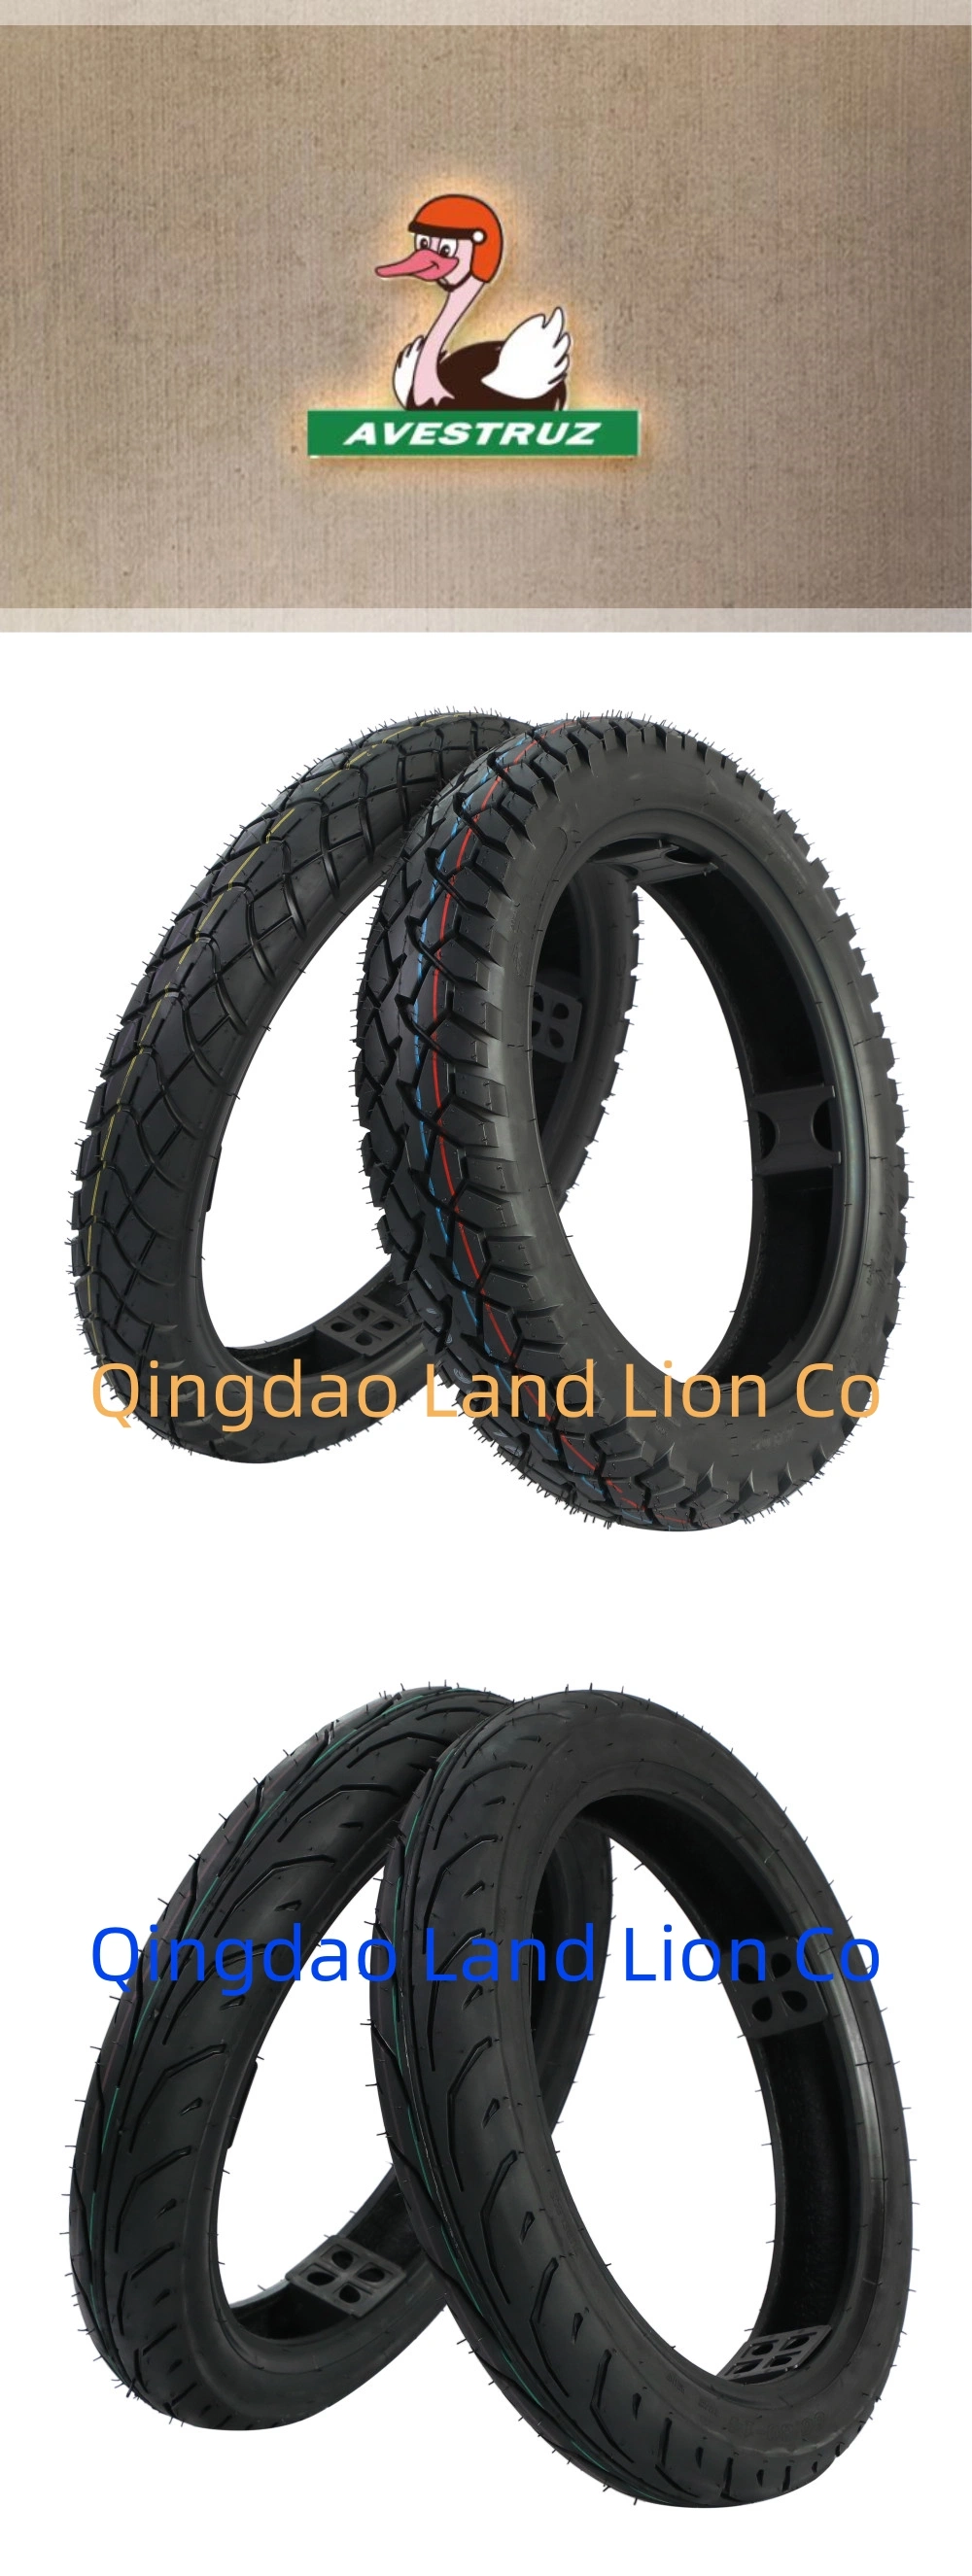 China Factory Directly Supply Gharry Tyre 5.00-15, 130/100-15